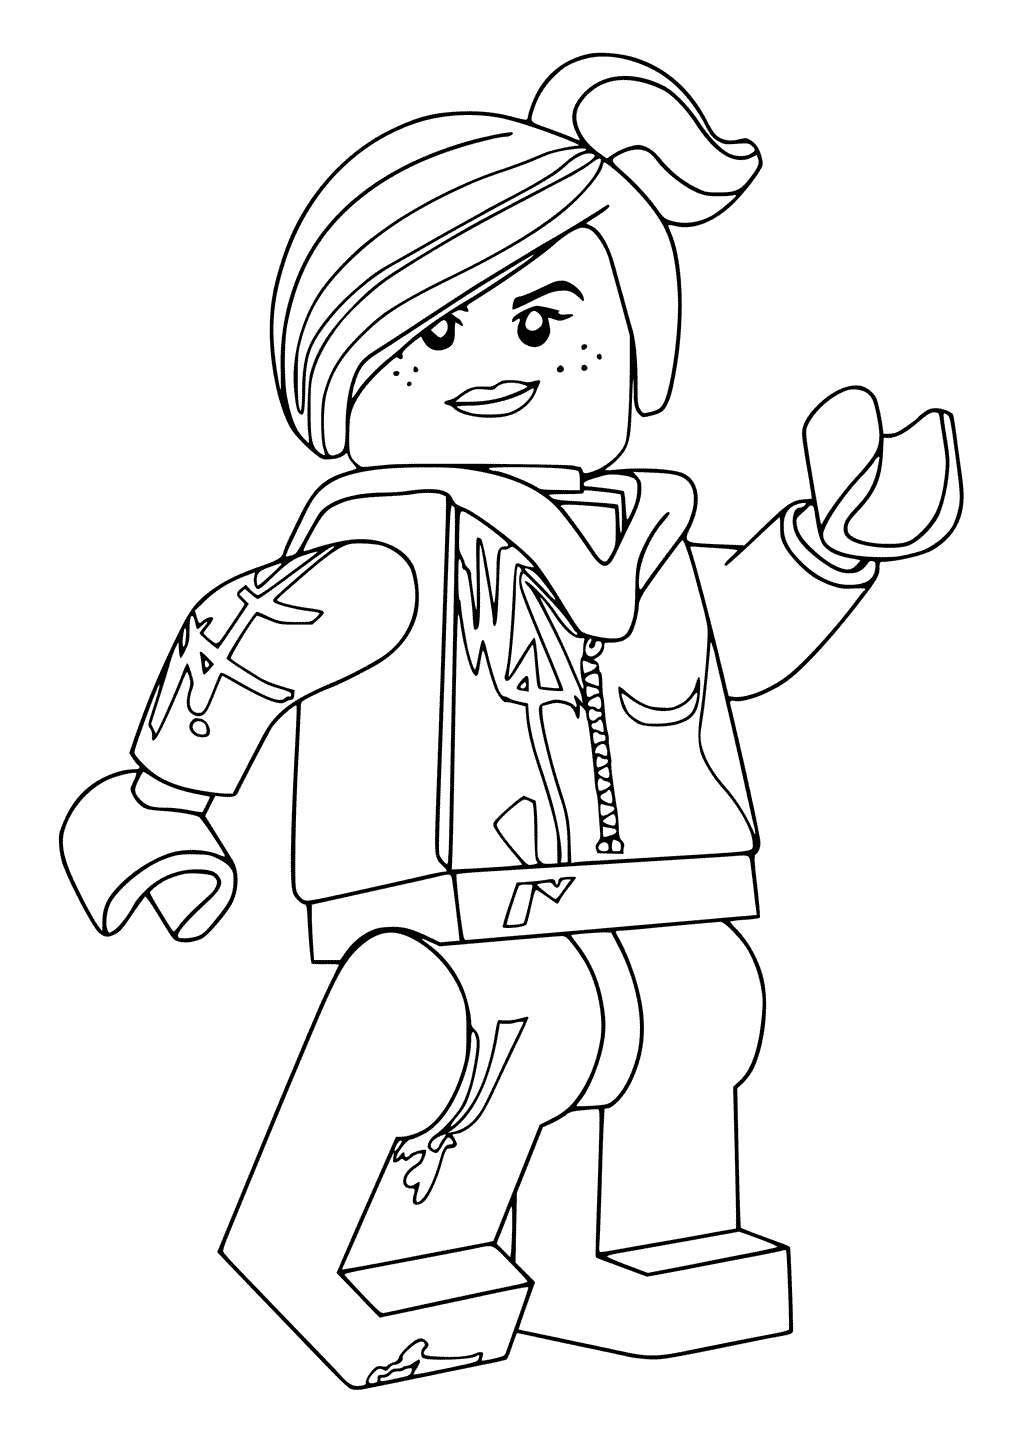 Wyldstyle Lego Movie Coloring Page